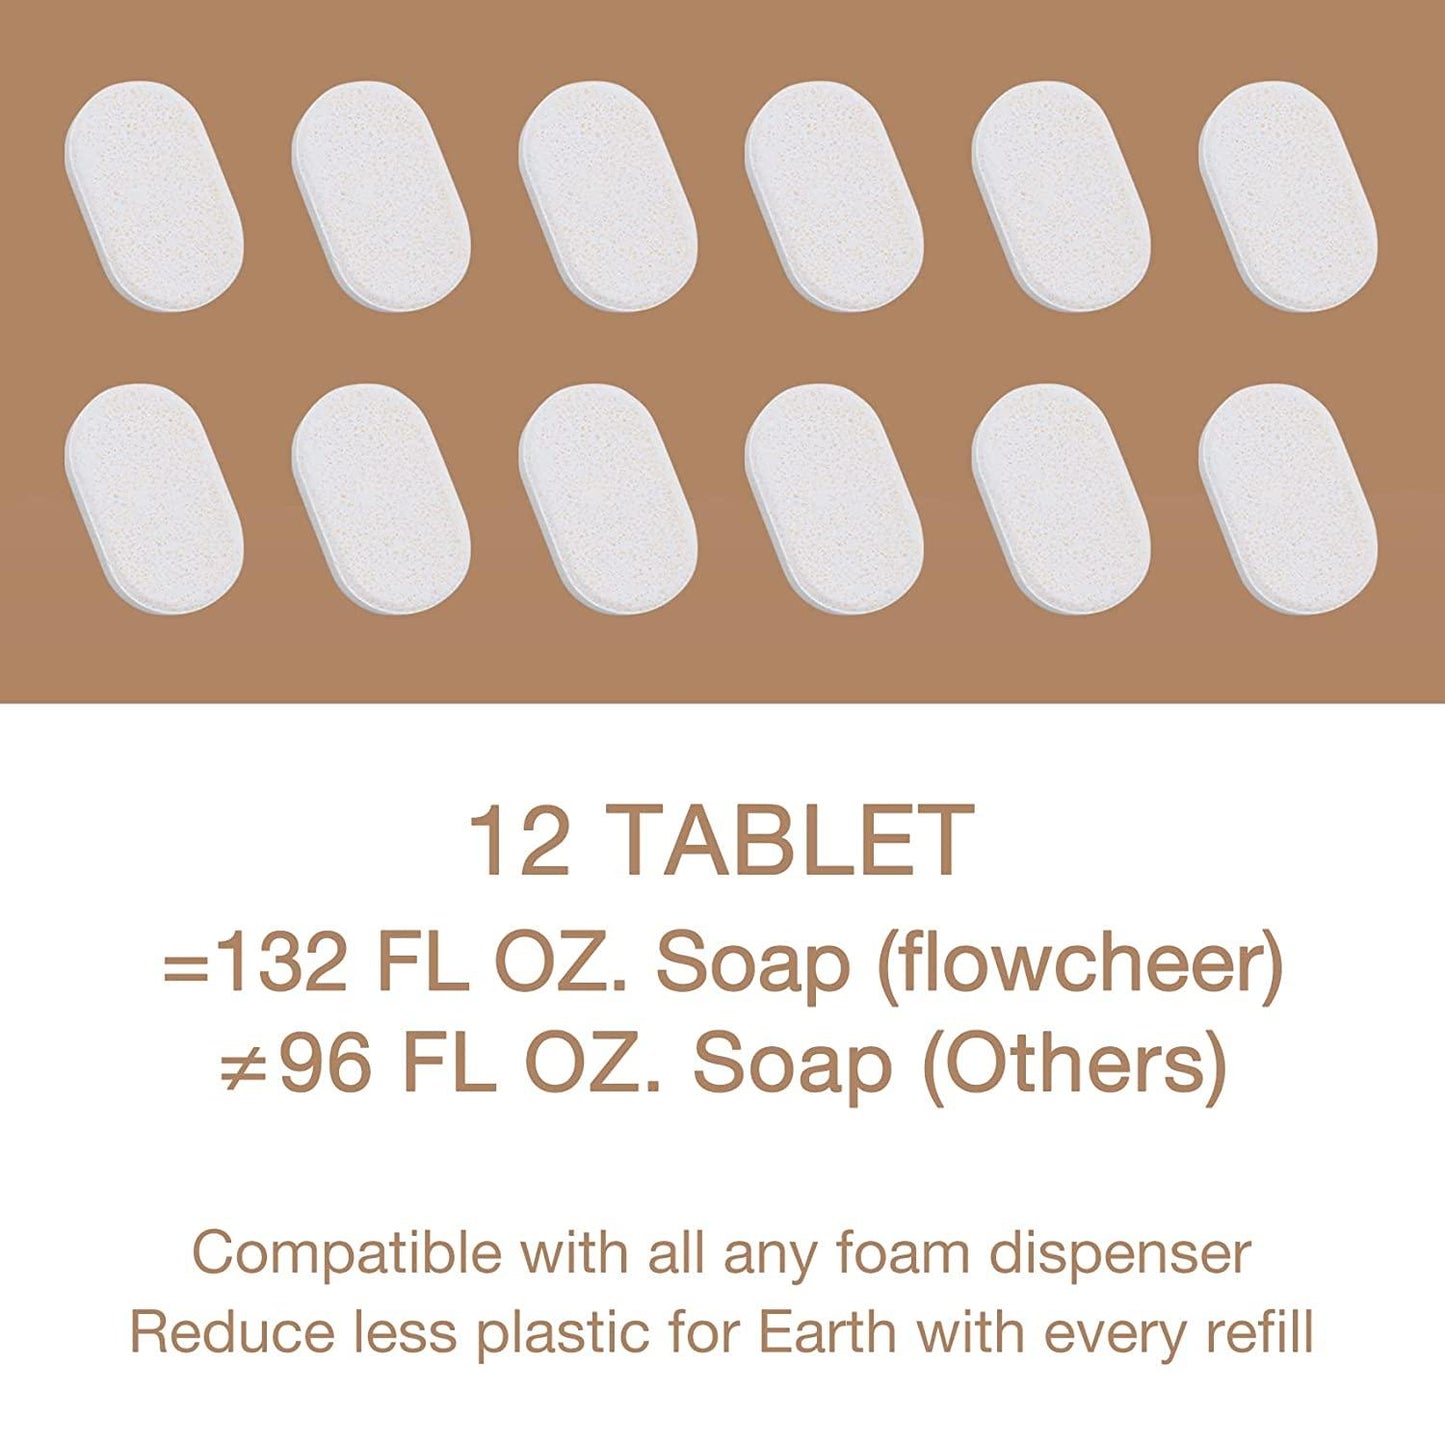 flowcheer foaming hand soap refill tablets are more efficient